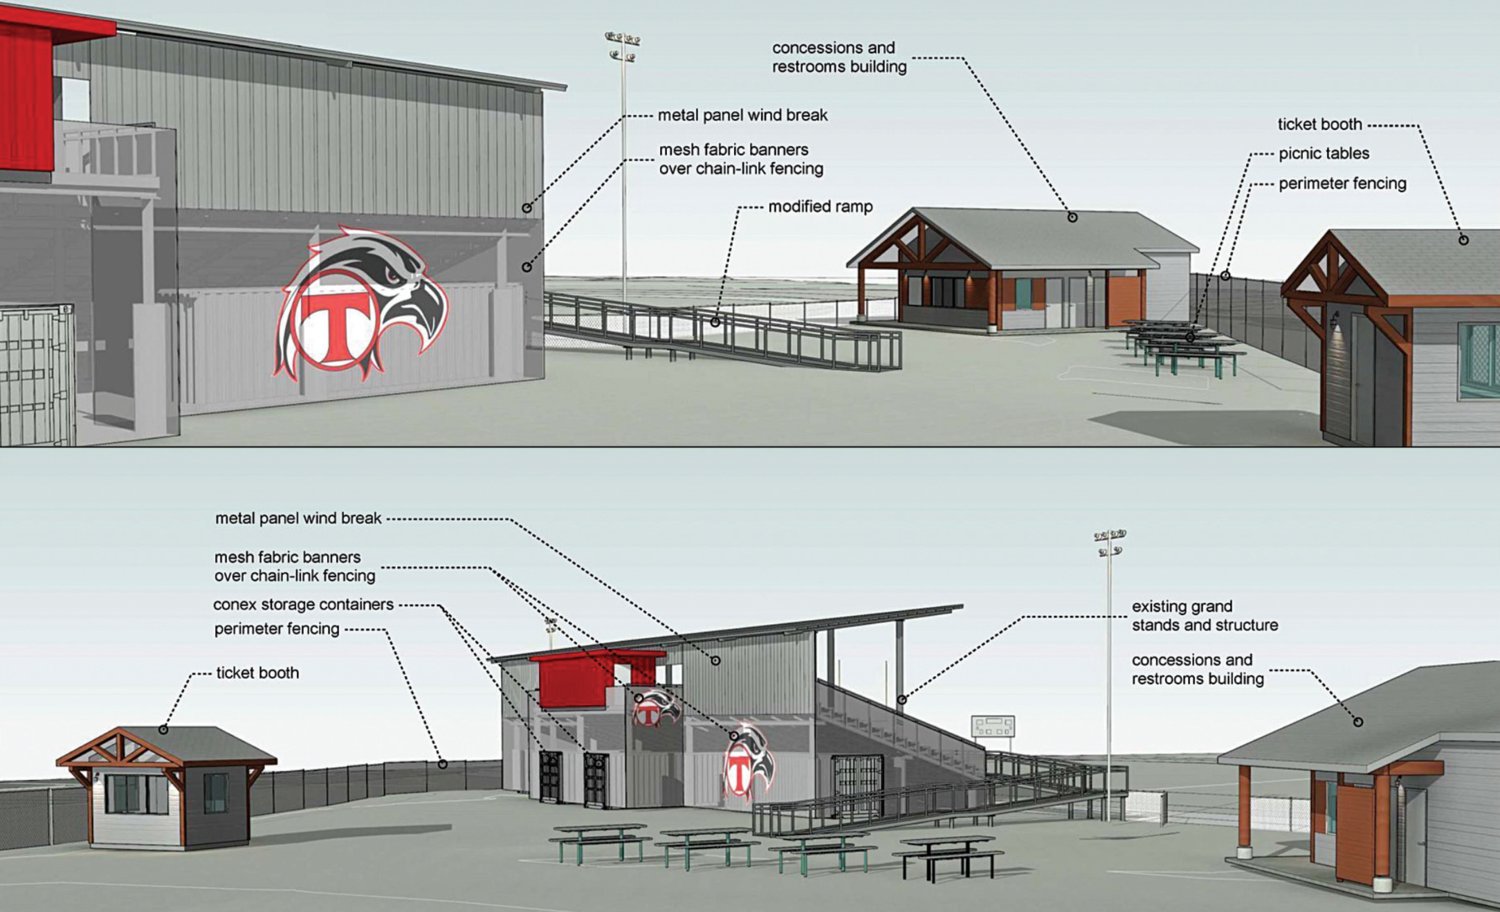 Proposed improvements to the Toledo High School stadium are detailed in these renderings provided by the school district.